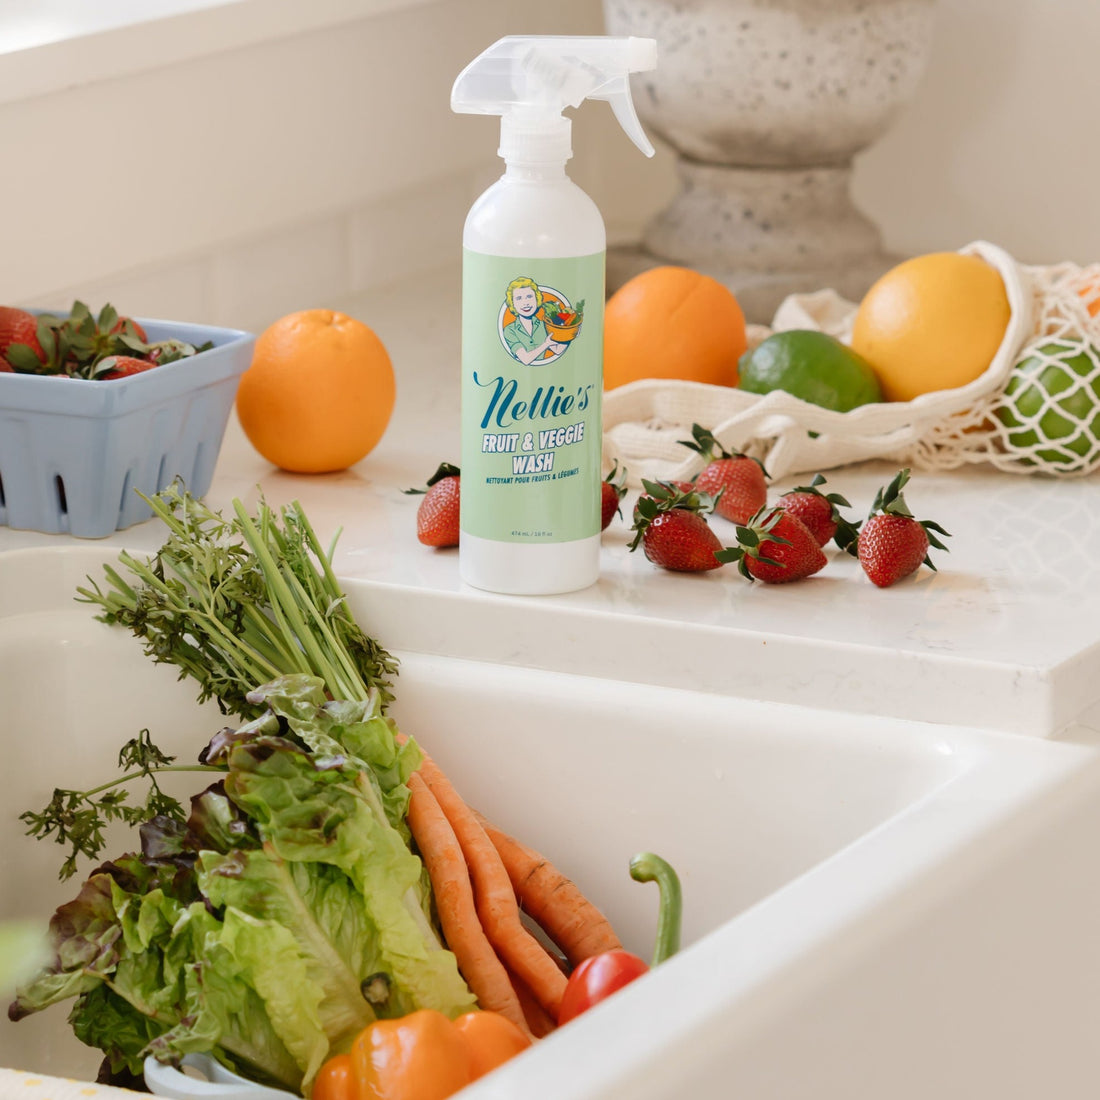 Vegetables in sink with Fruit and Vegetable wash spray on counter